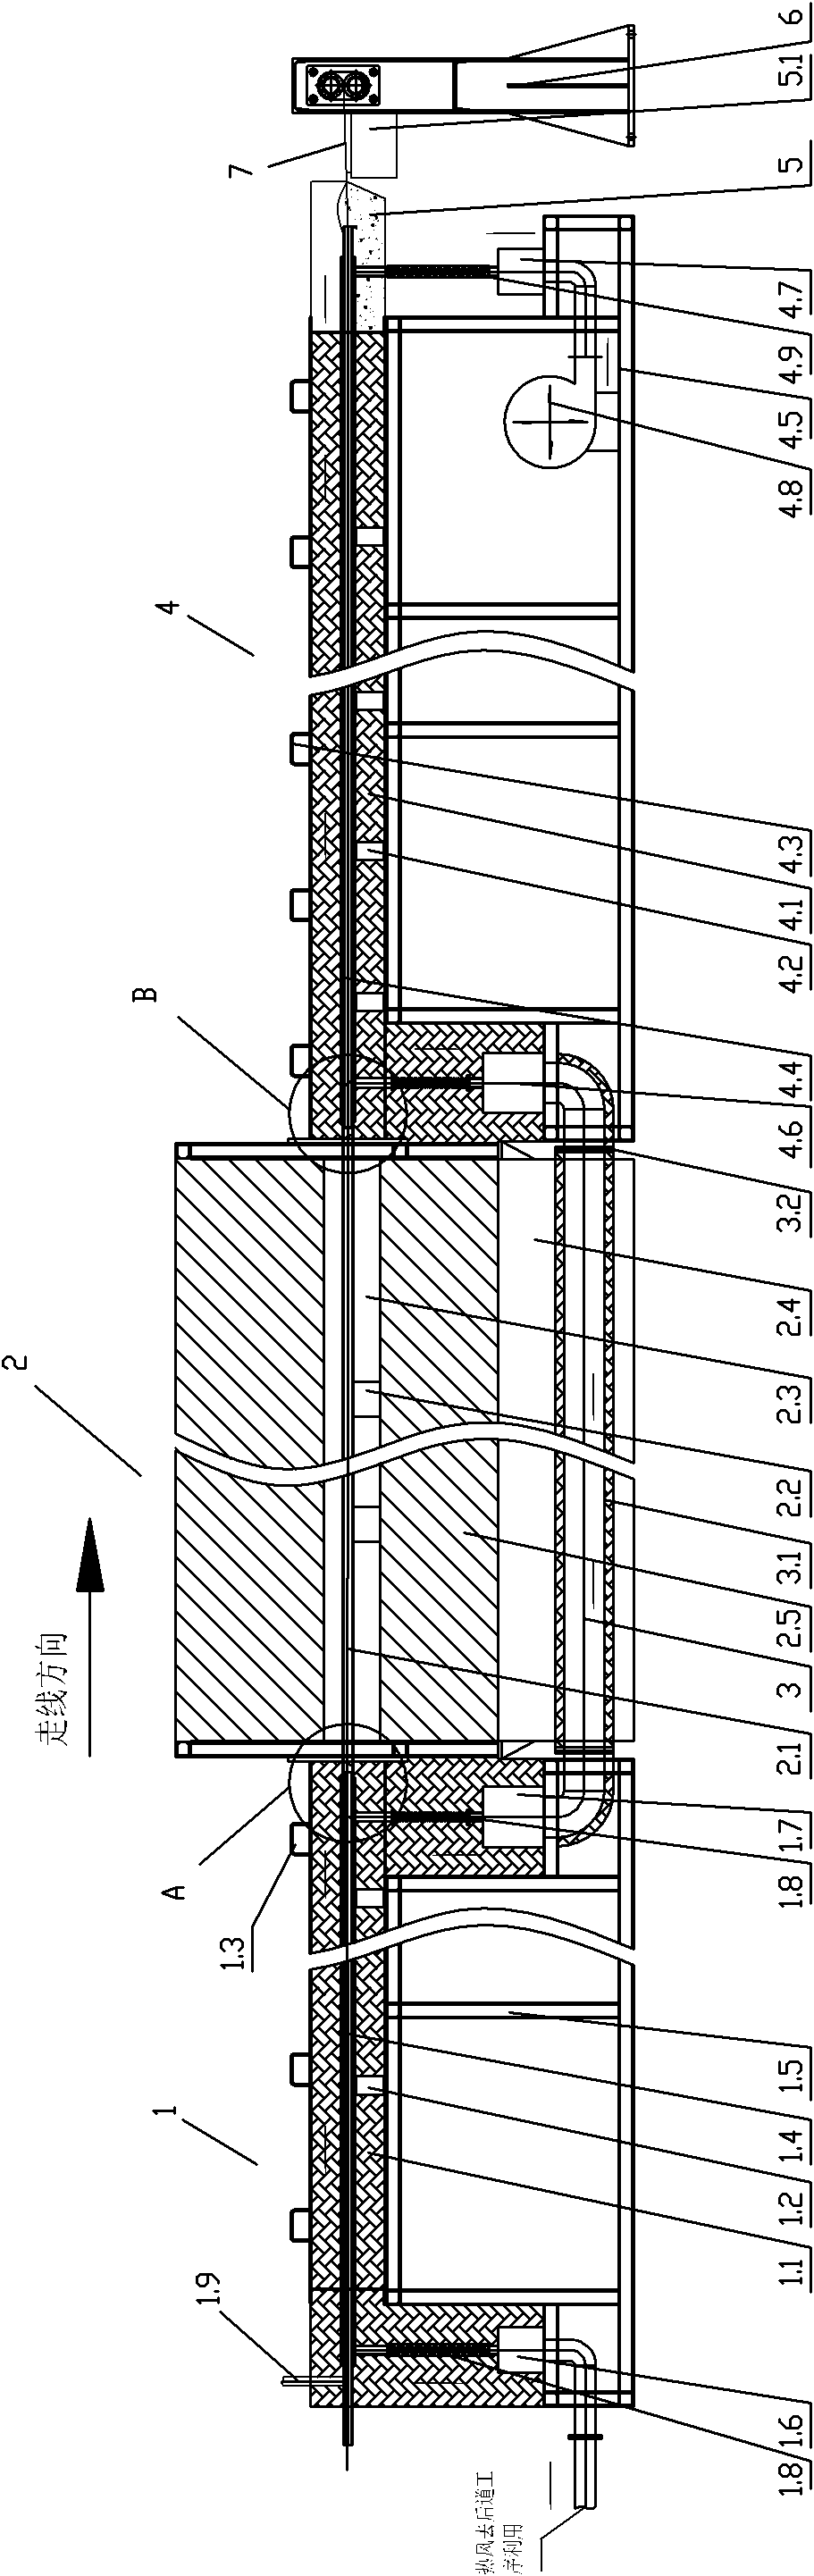 Thermal treatment furnace for carrying out continuous heating and cooling circulation on steel wires